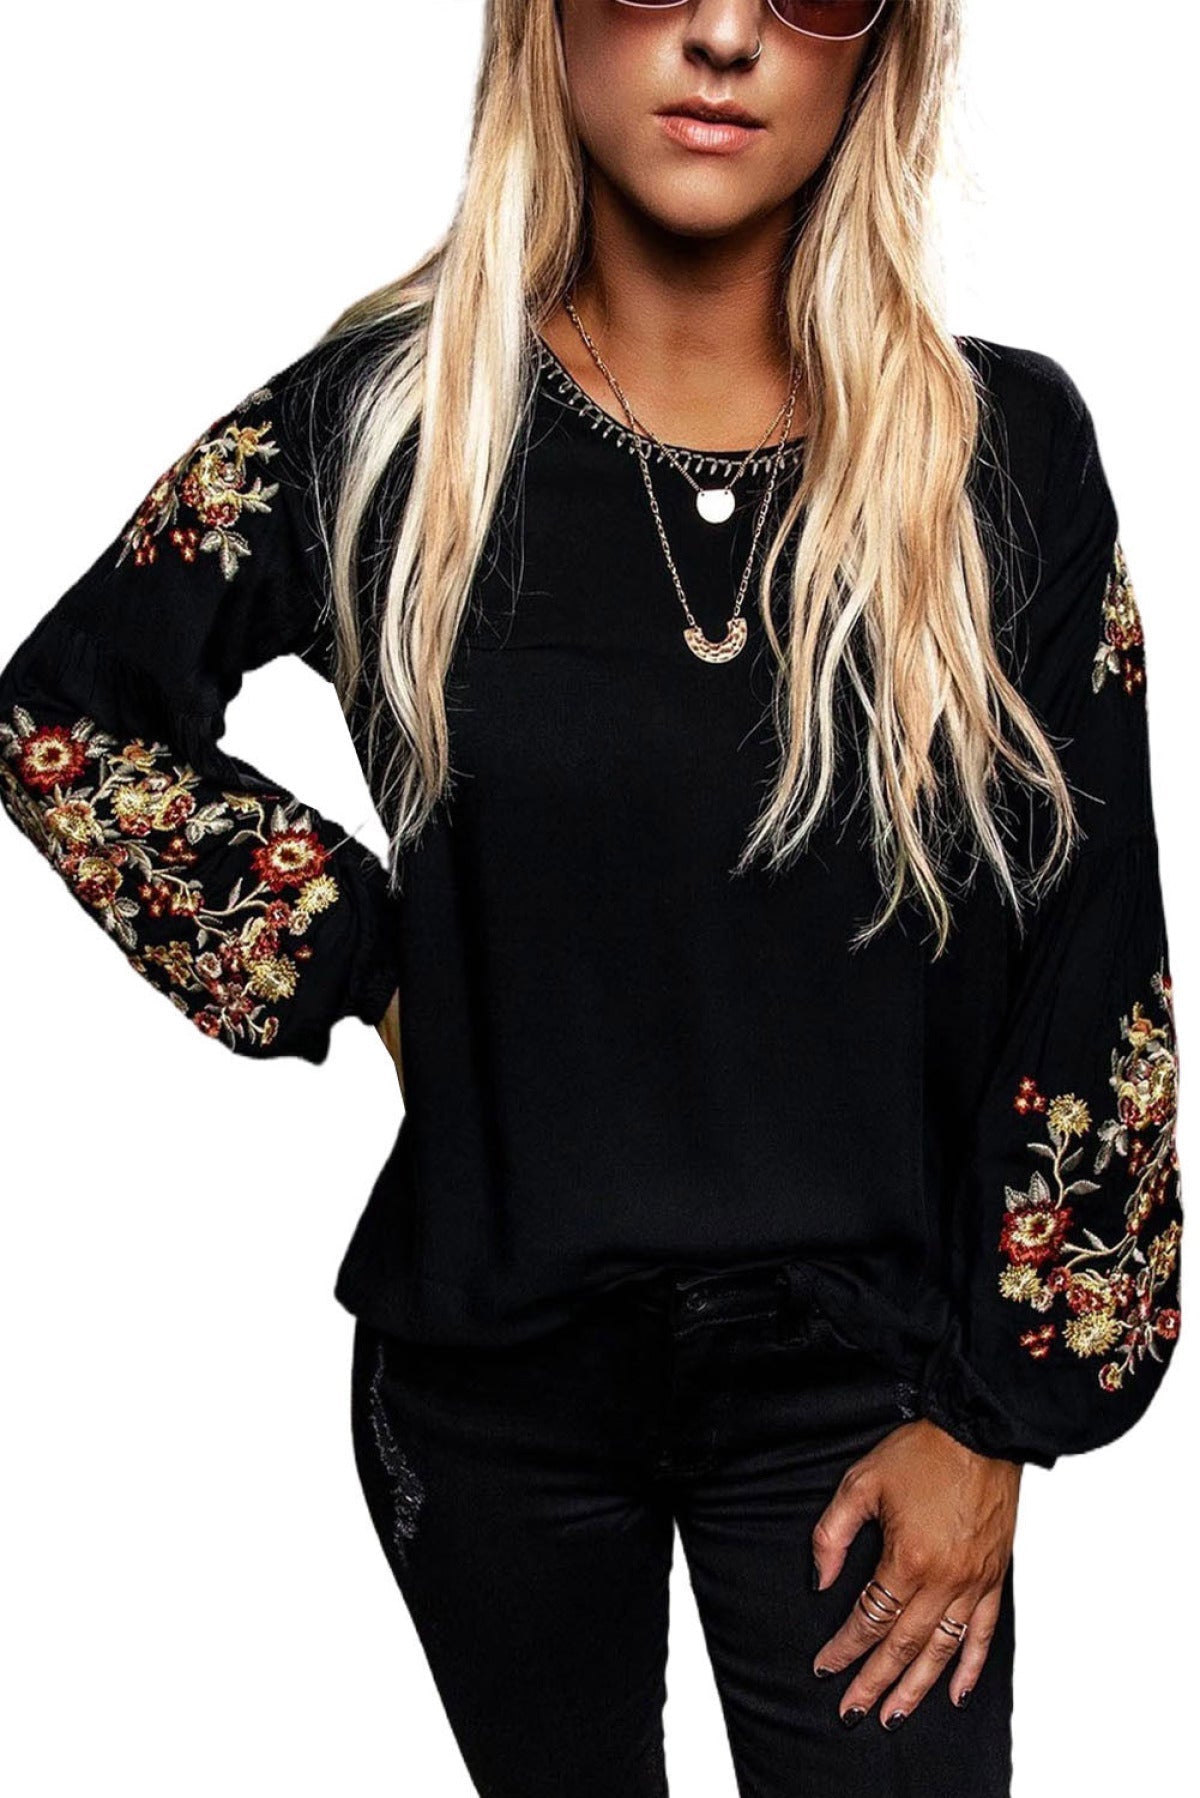 Floral Embroidery Long Sleeve Top Angelwarriorfitness.com